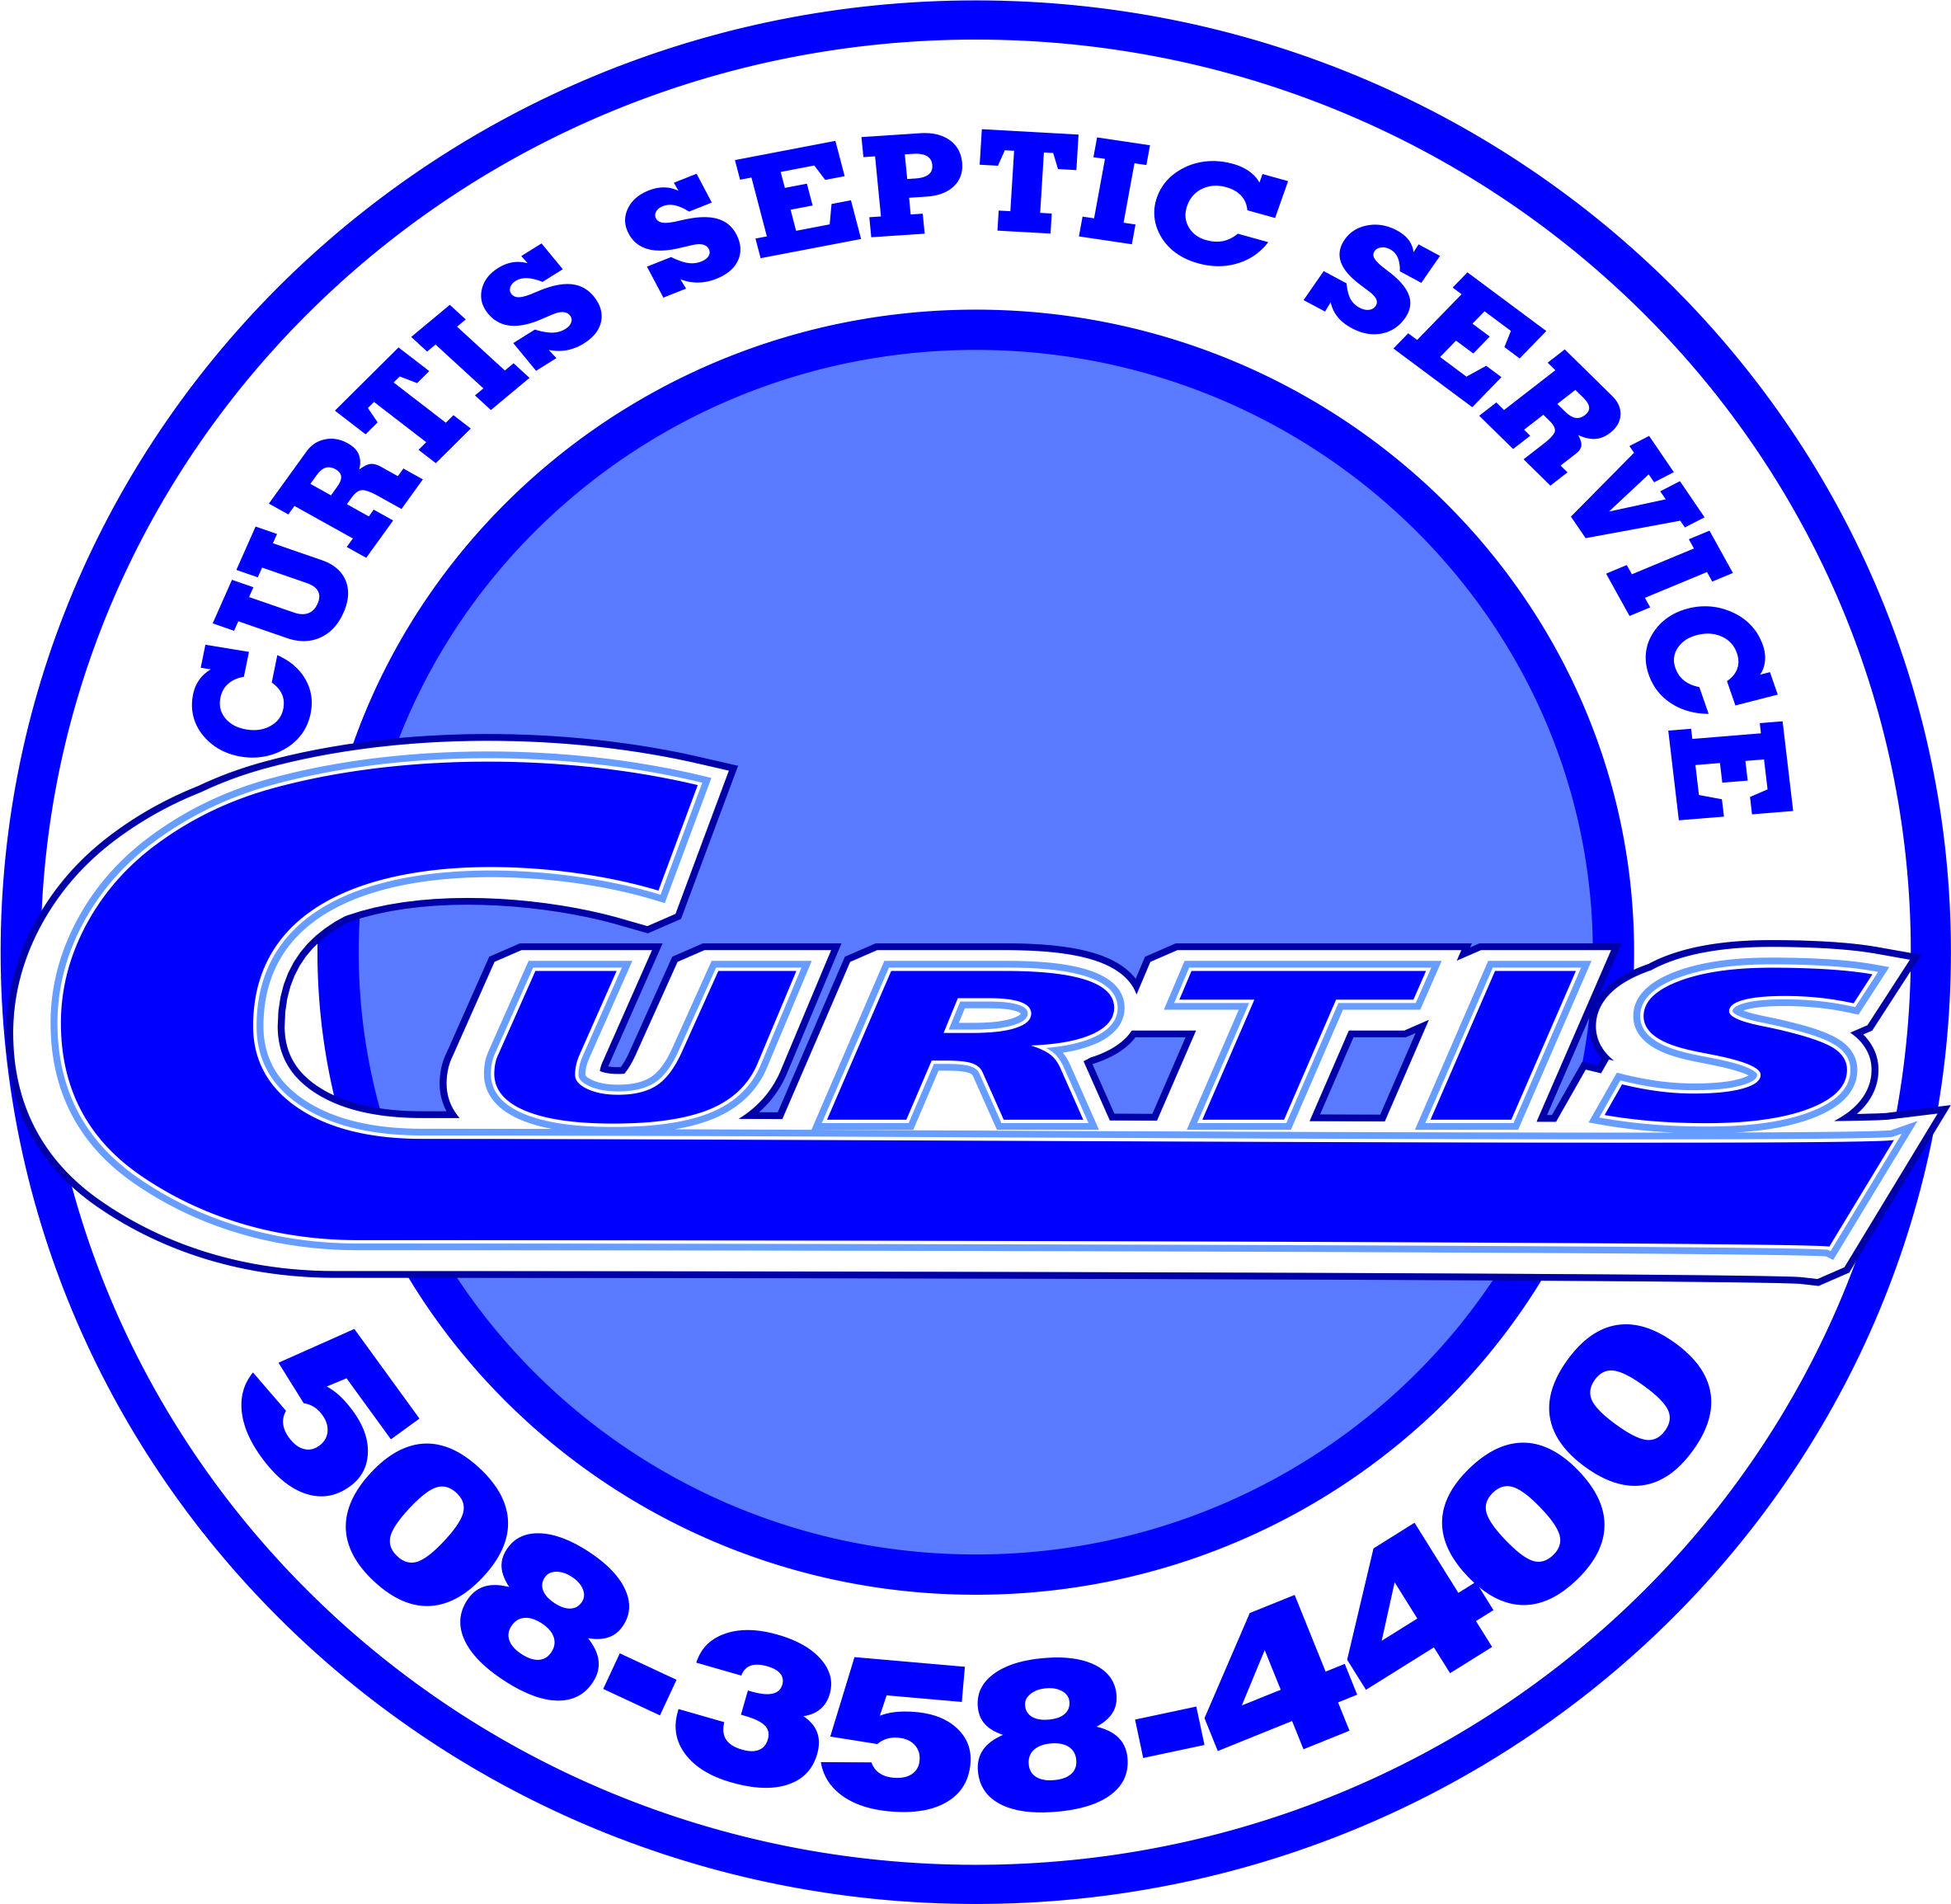 Septic system inspectors in Stow, MA.